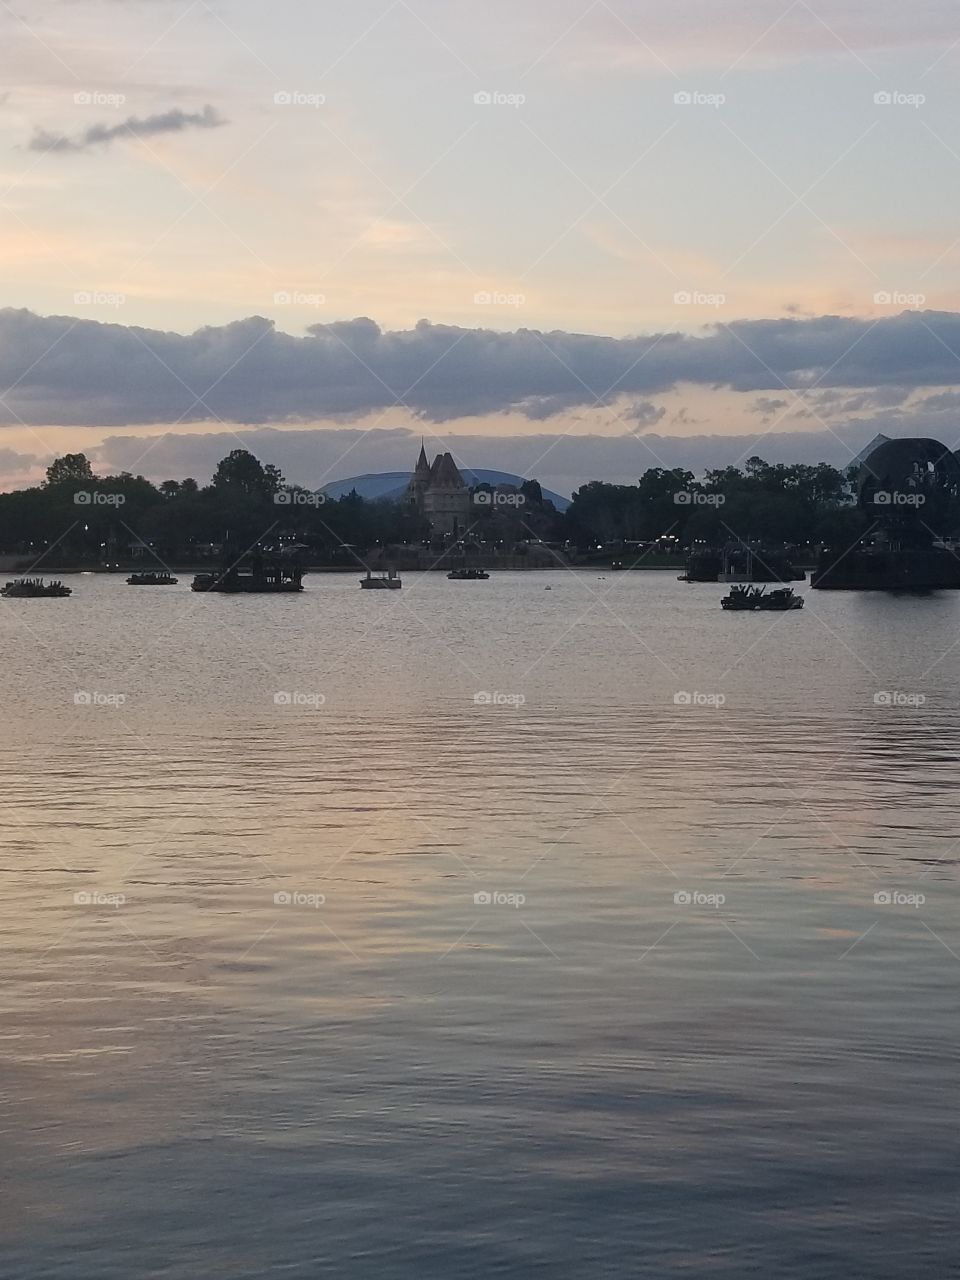 On the Water (Epcot)